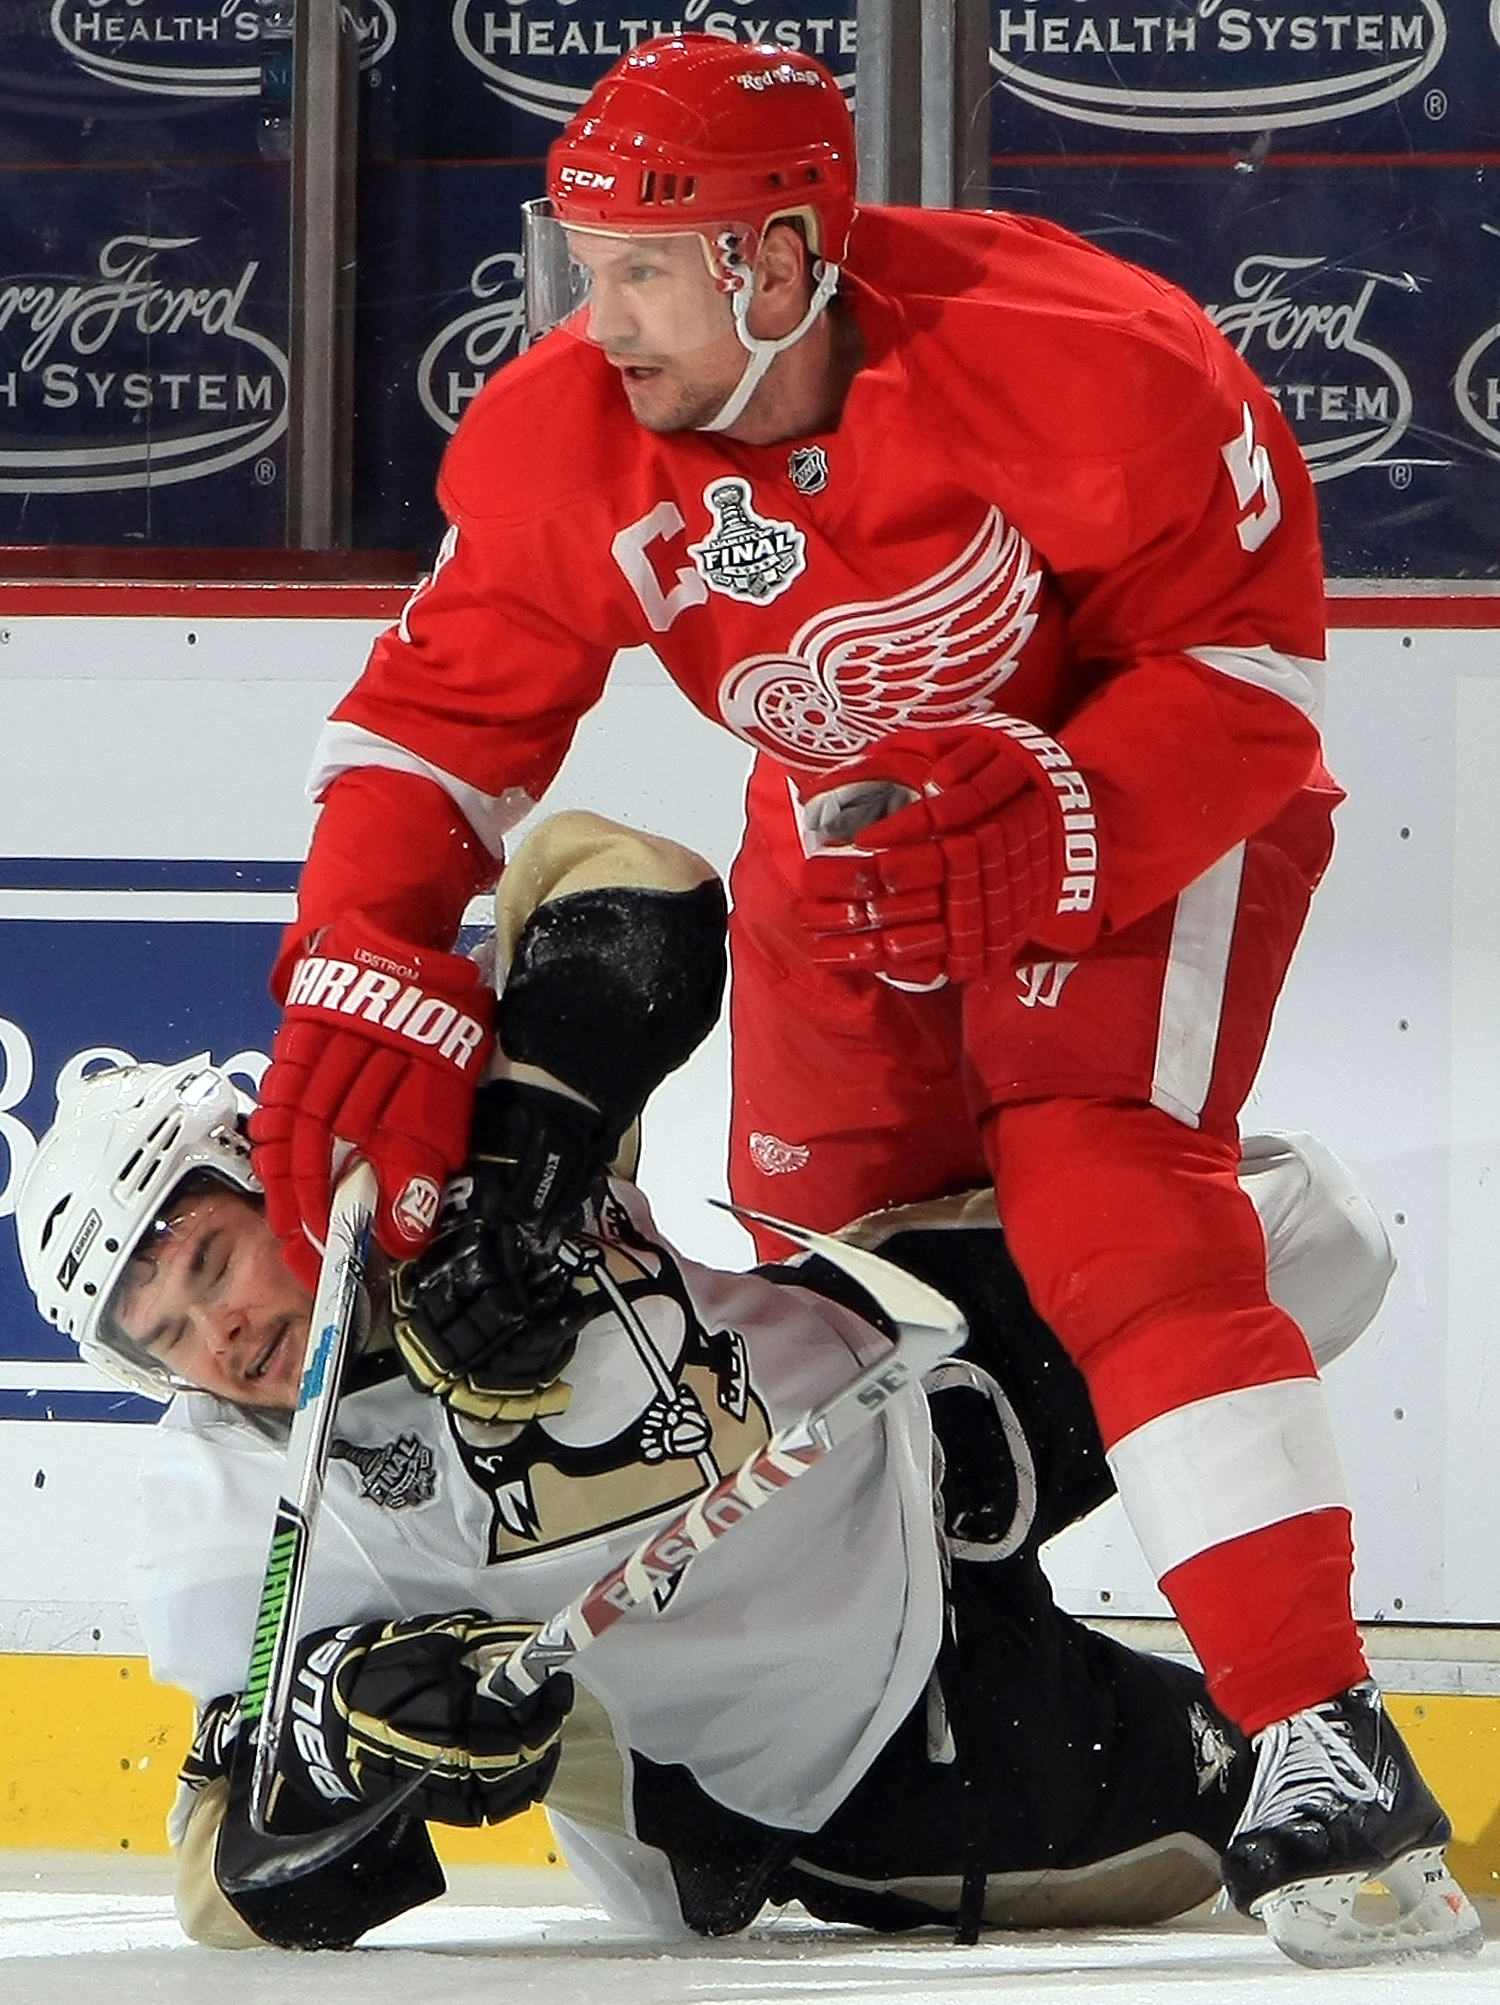 Q&A: Life after Nicklas Lidstrom in Detroit